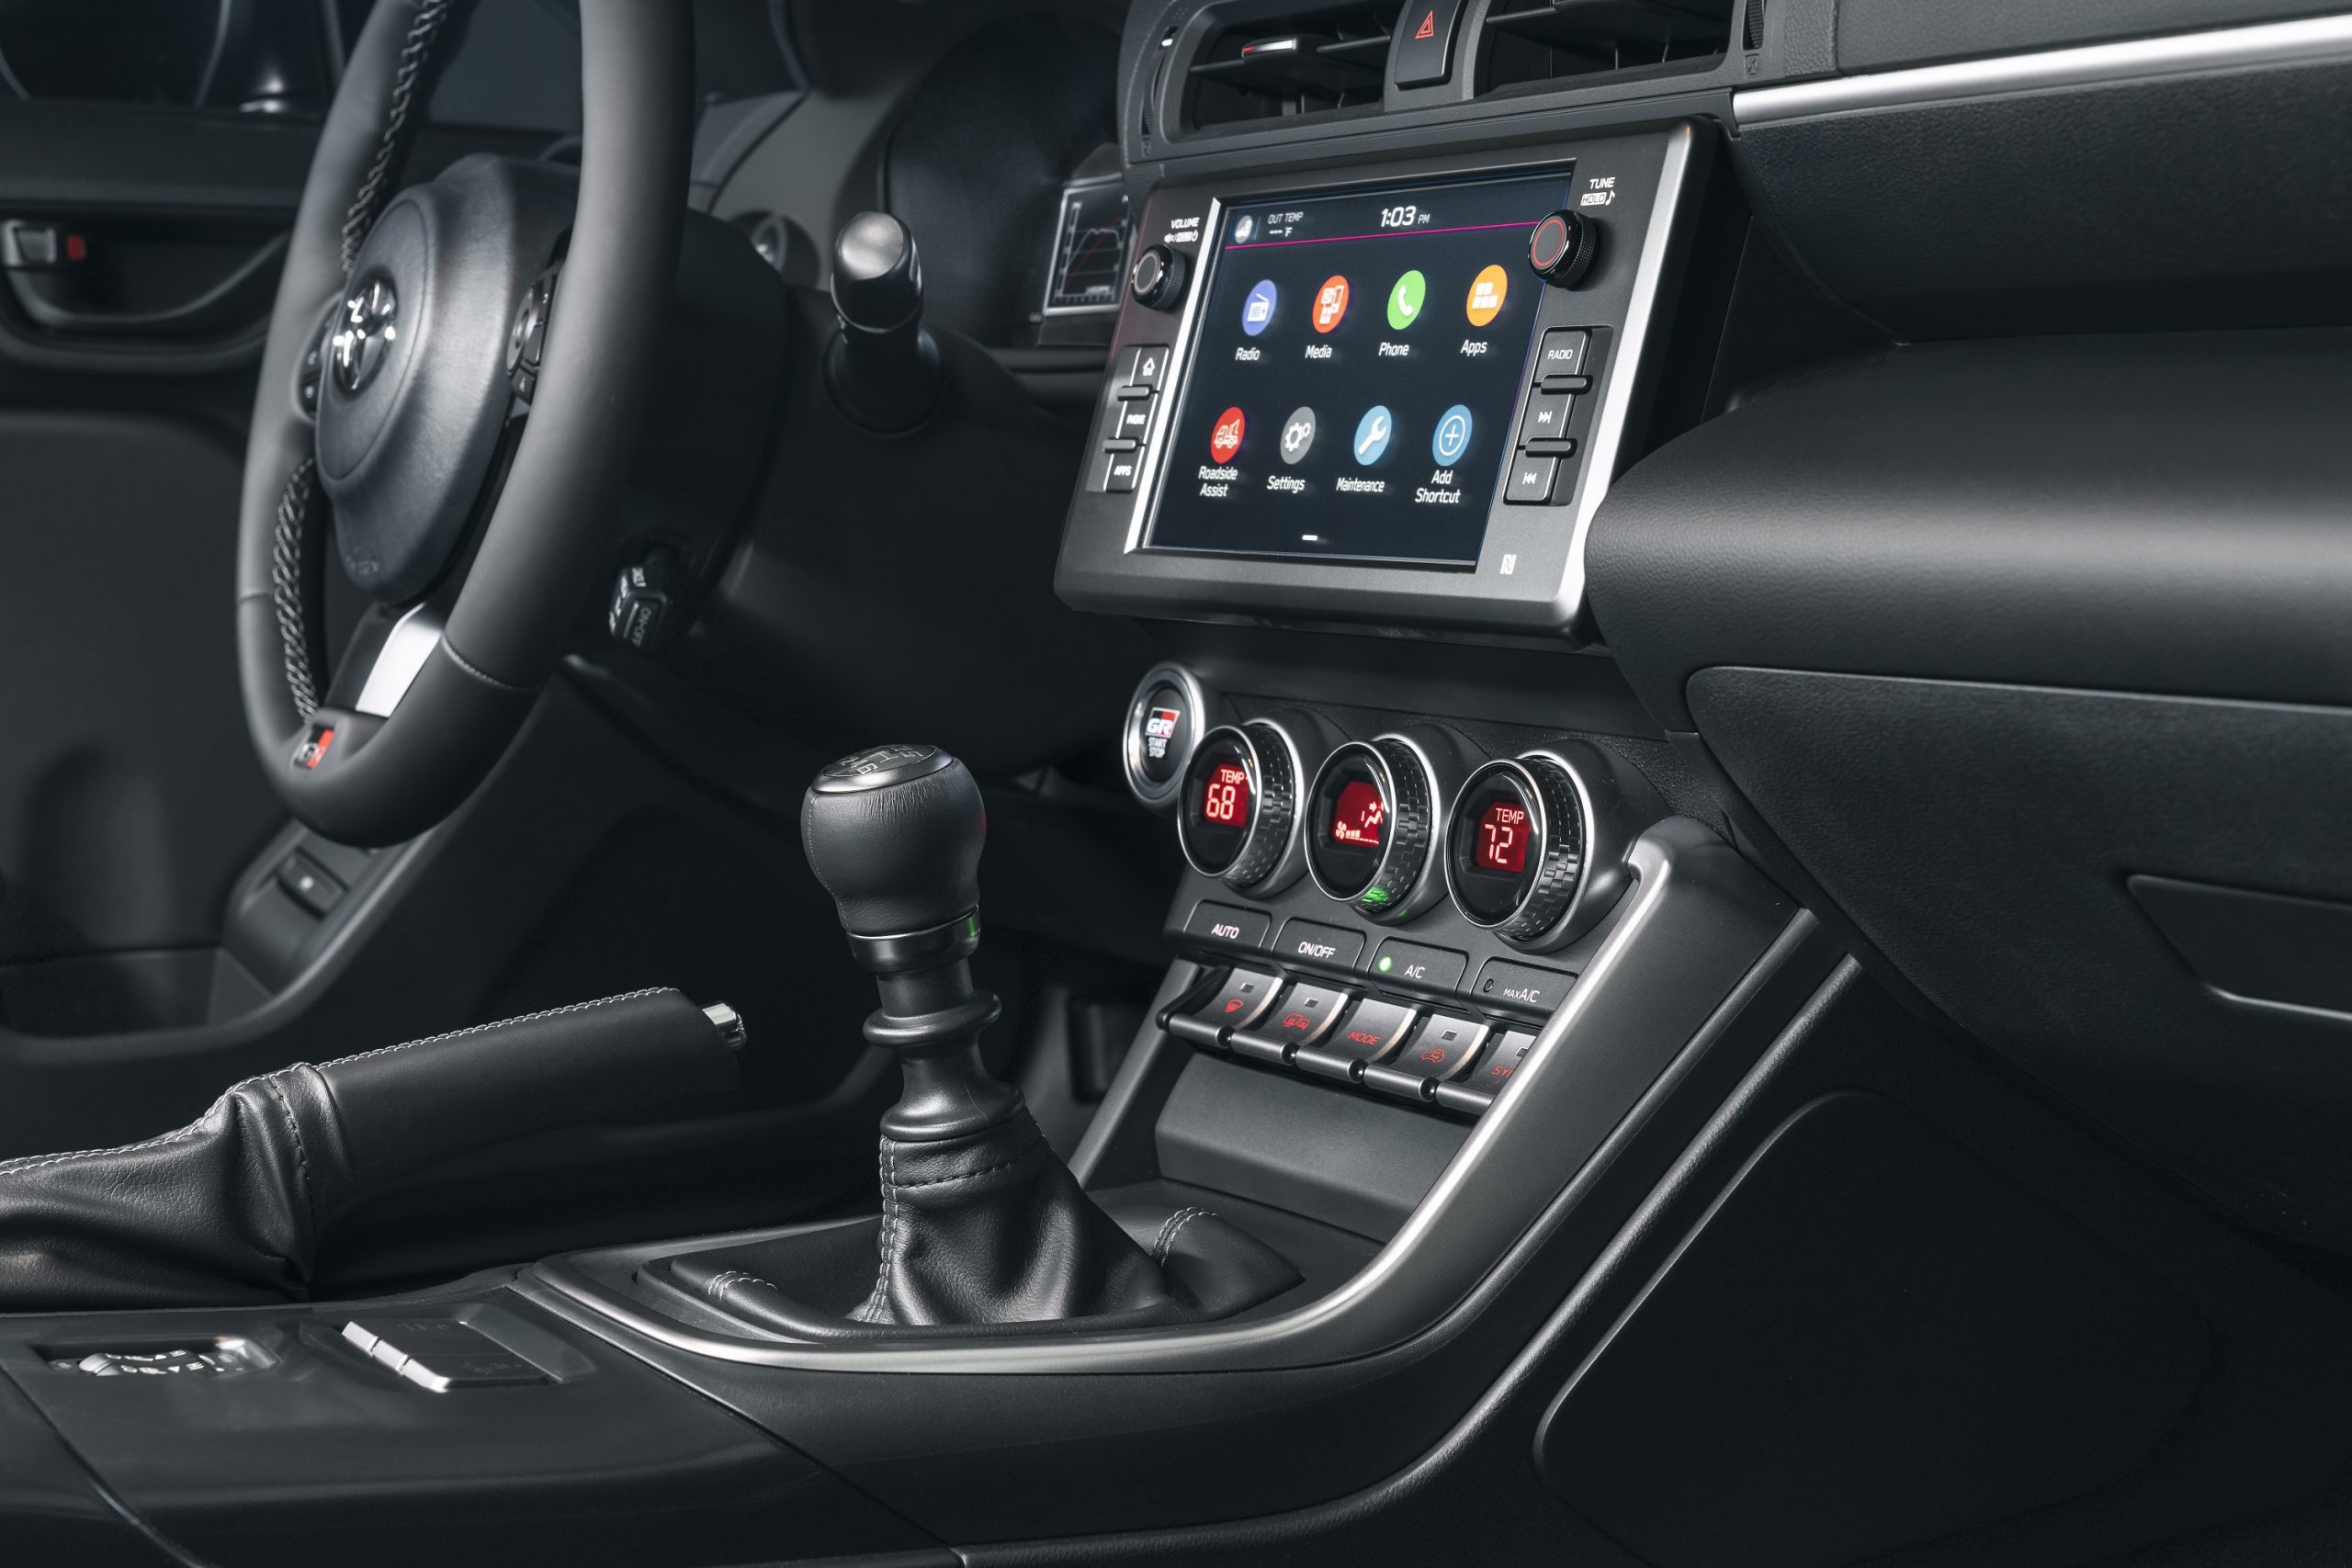 The manual transmission shifter in a 2022 Toyota GR86. Continued use of manual transmissions is one of the best car trends in recent memory